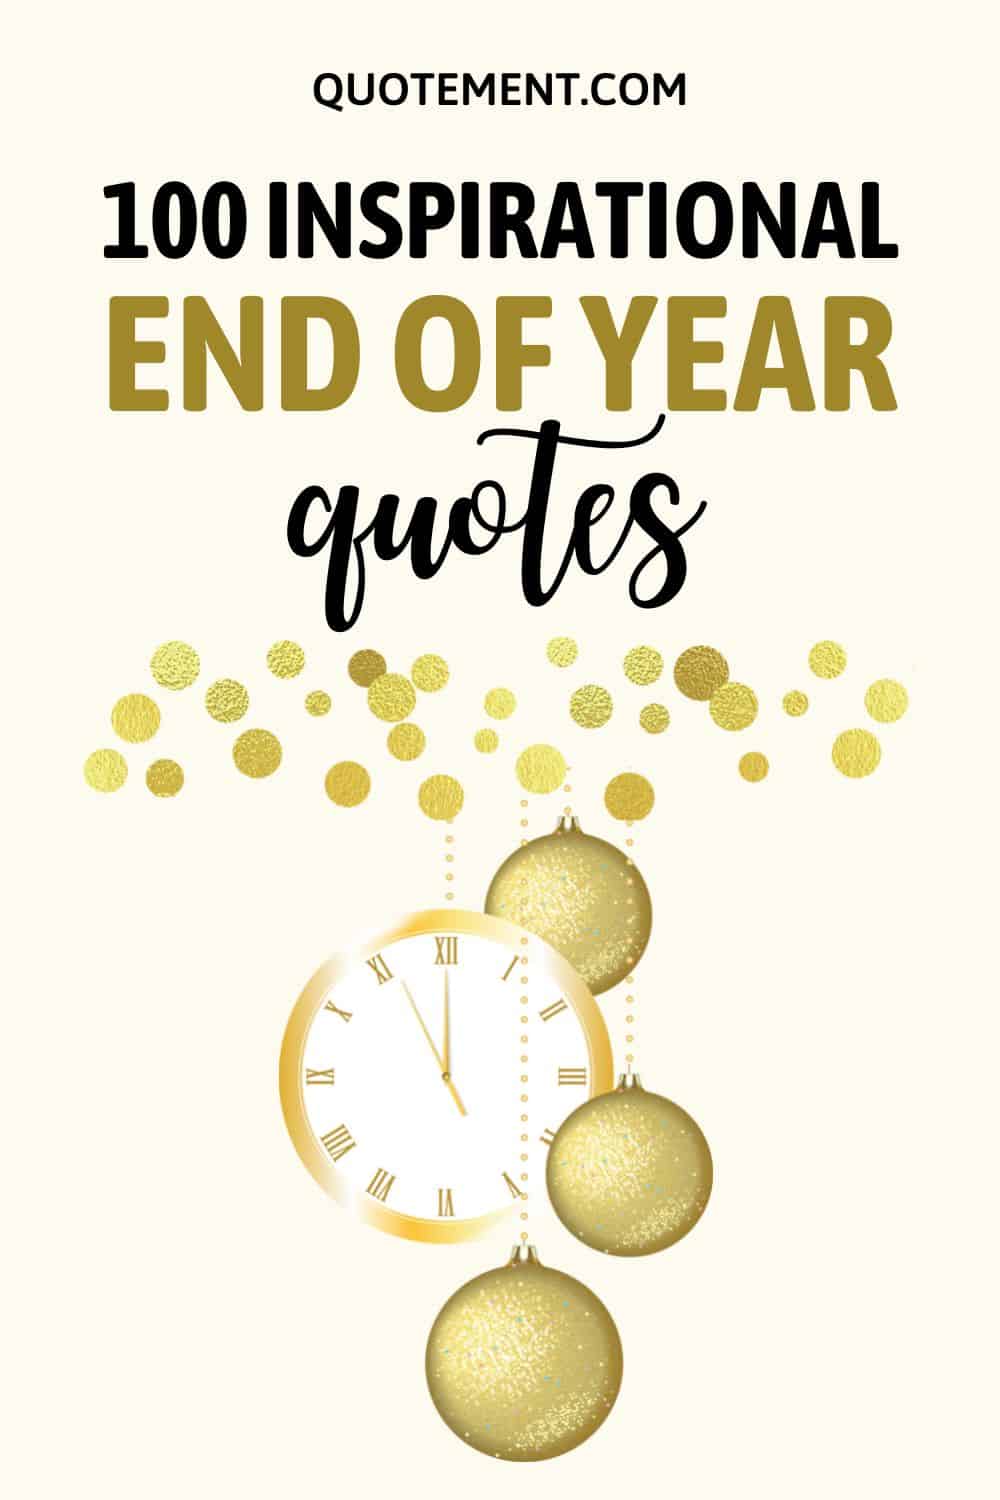 100 Inspiring End Of Year Quotes For Goal-Setting Time
